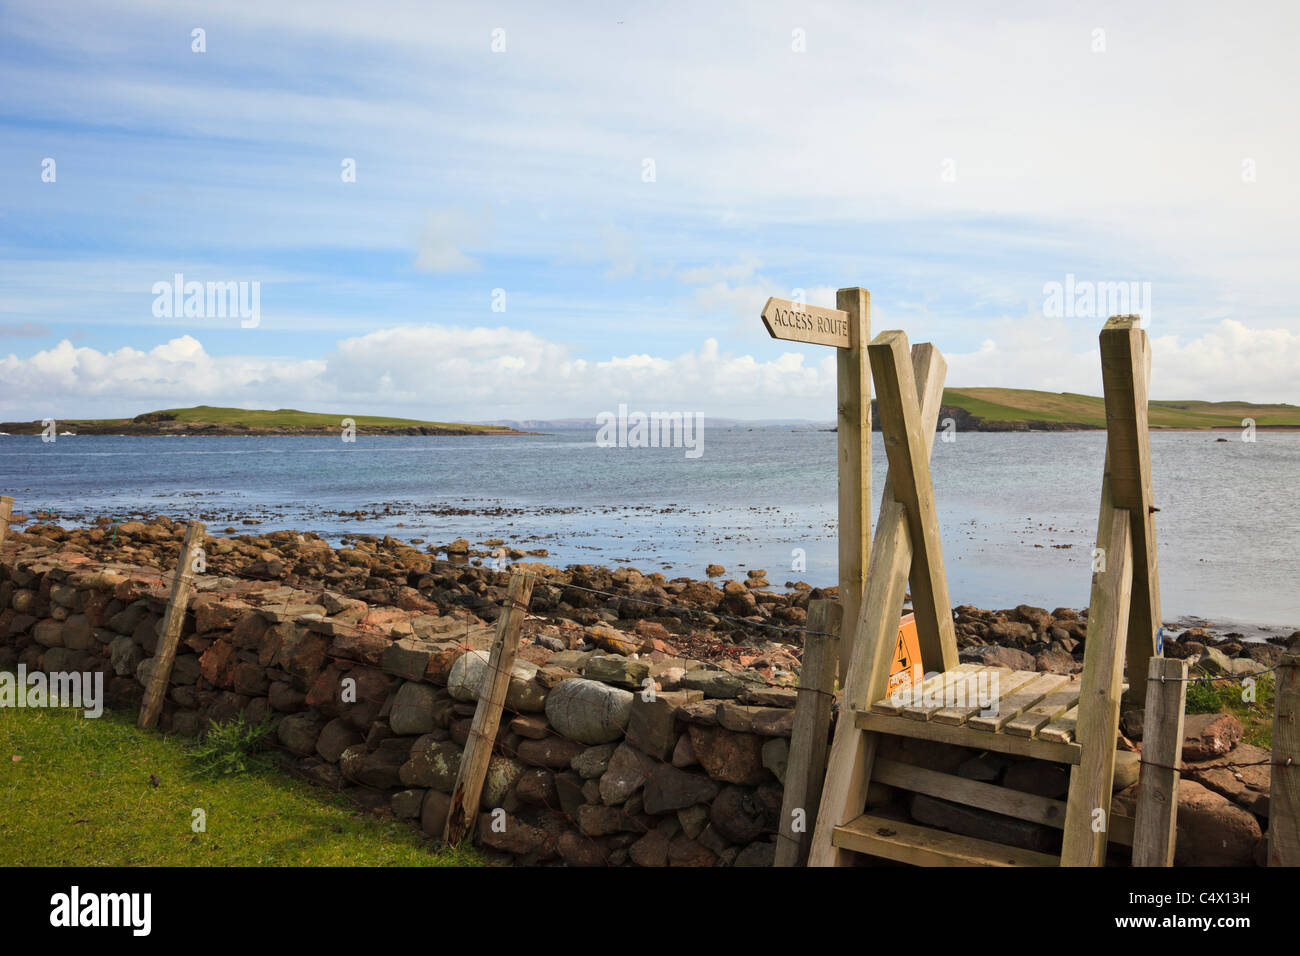 Ness of Melby, Sandness, Shetland Islands, Scotland, UK. Sandness coastal walkway sign and stile with view to Melby Holm island Stock Photo